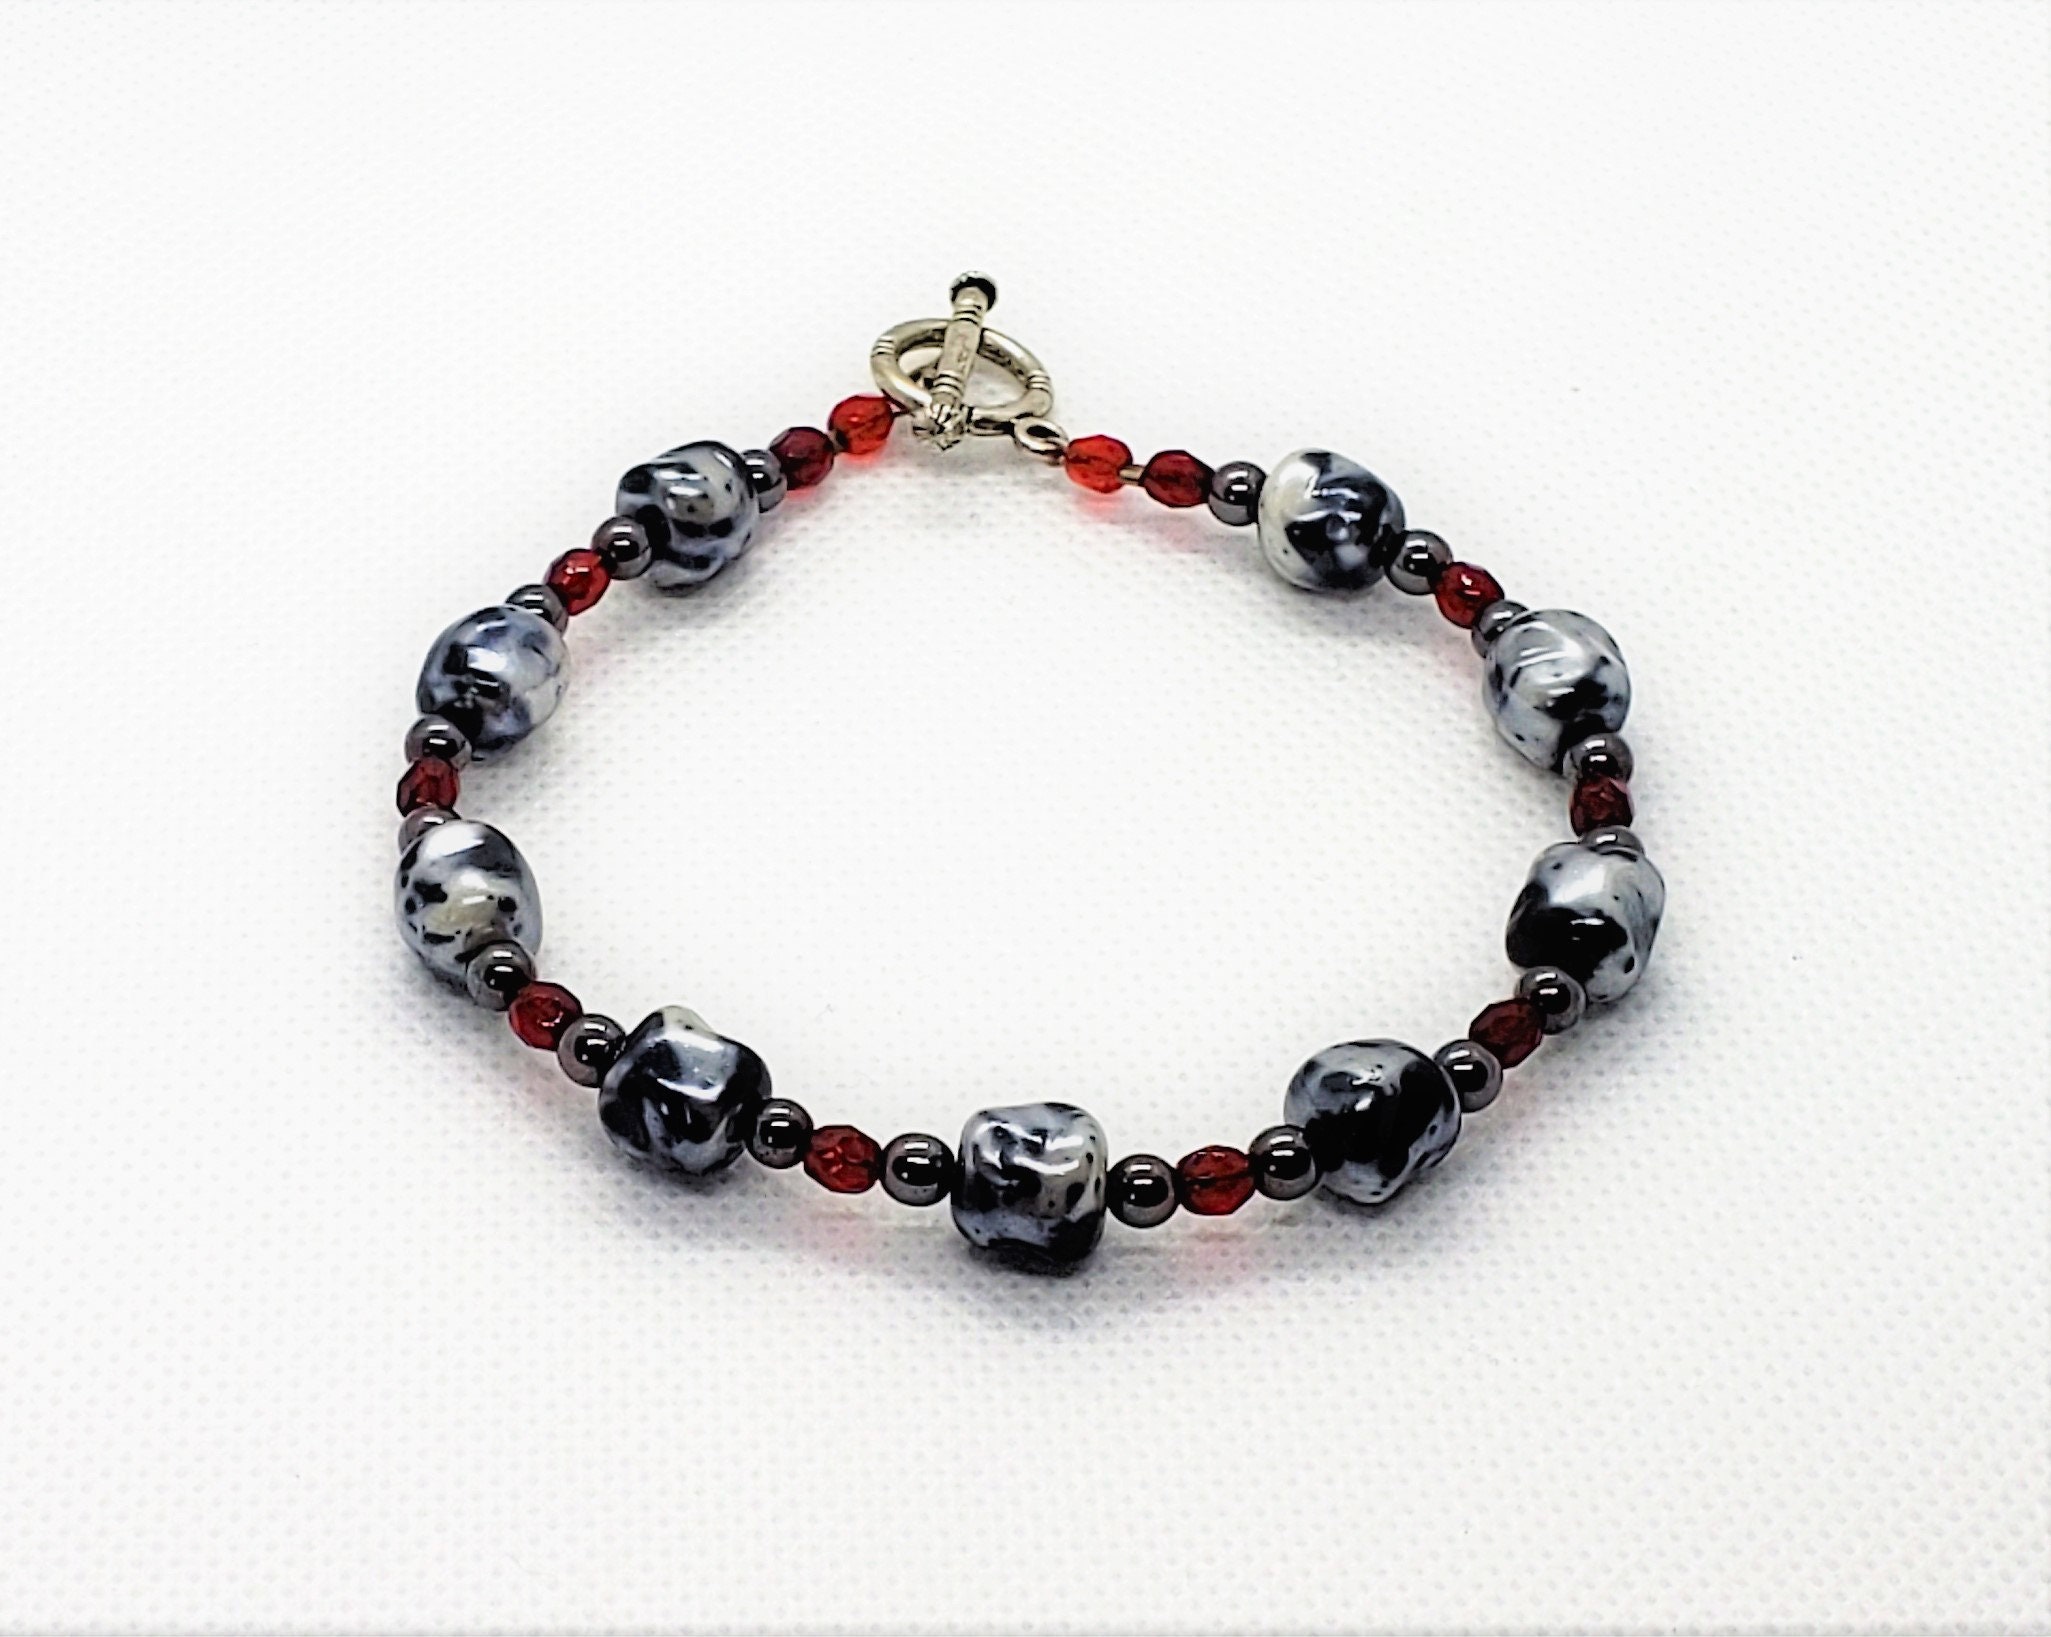 Obsidian Pagan Wicca Jewellery Gift Hematite Crystal Bracelet with Triquetras 